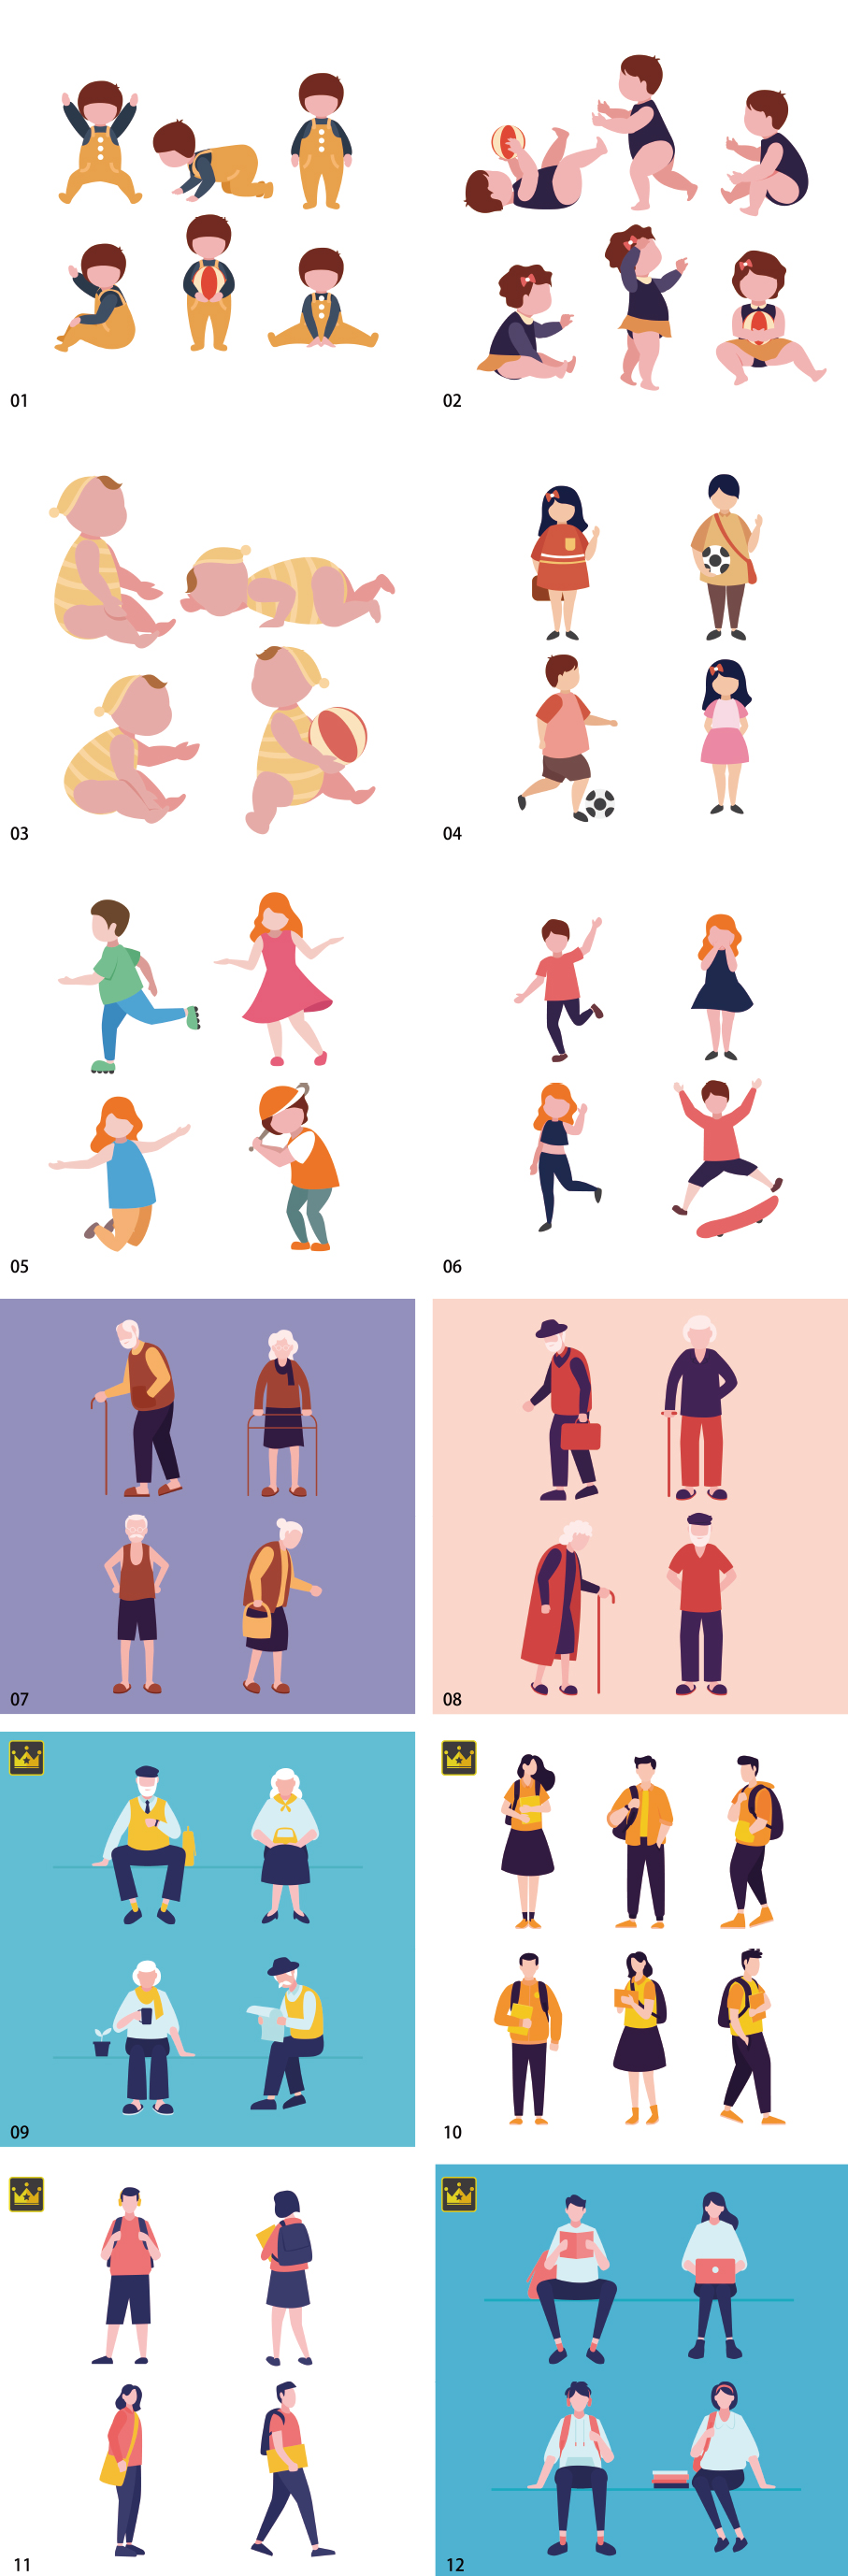 People illustration collection